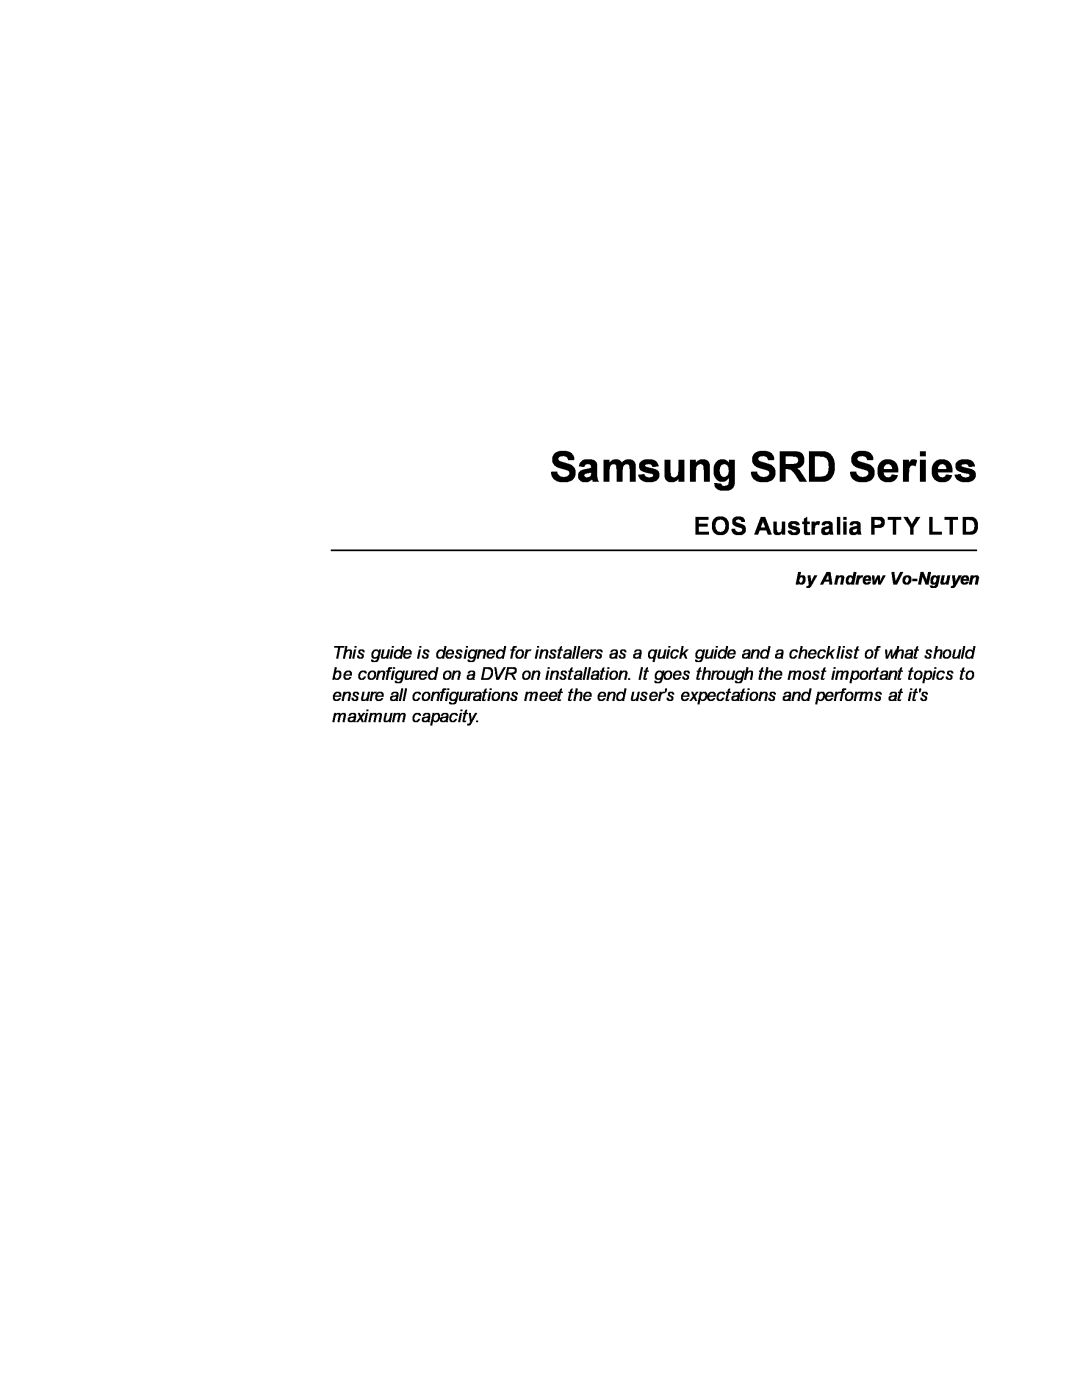 Samsung SDR4200 manual Samsung SRD Series, by Andrew Vo-Nguyen 